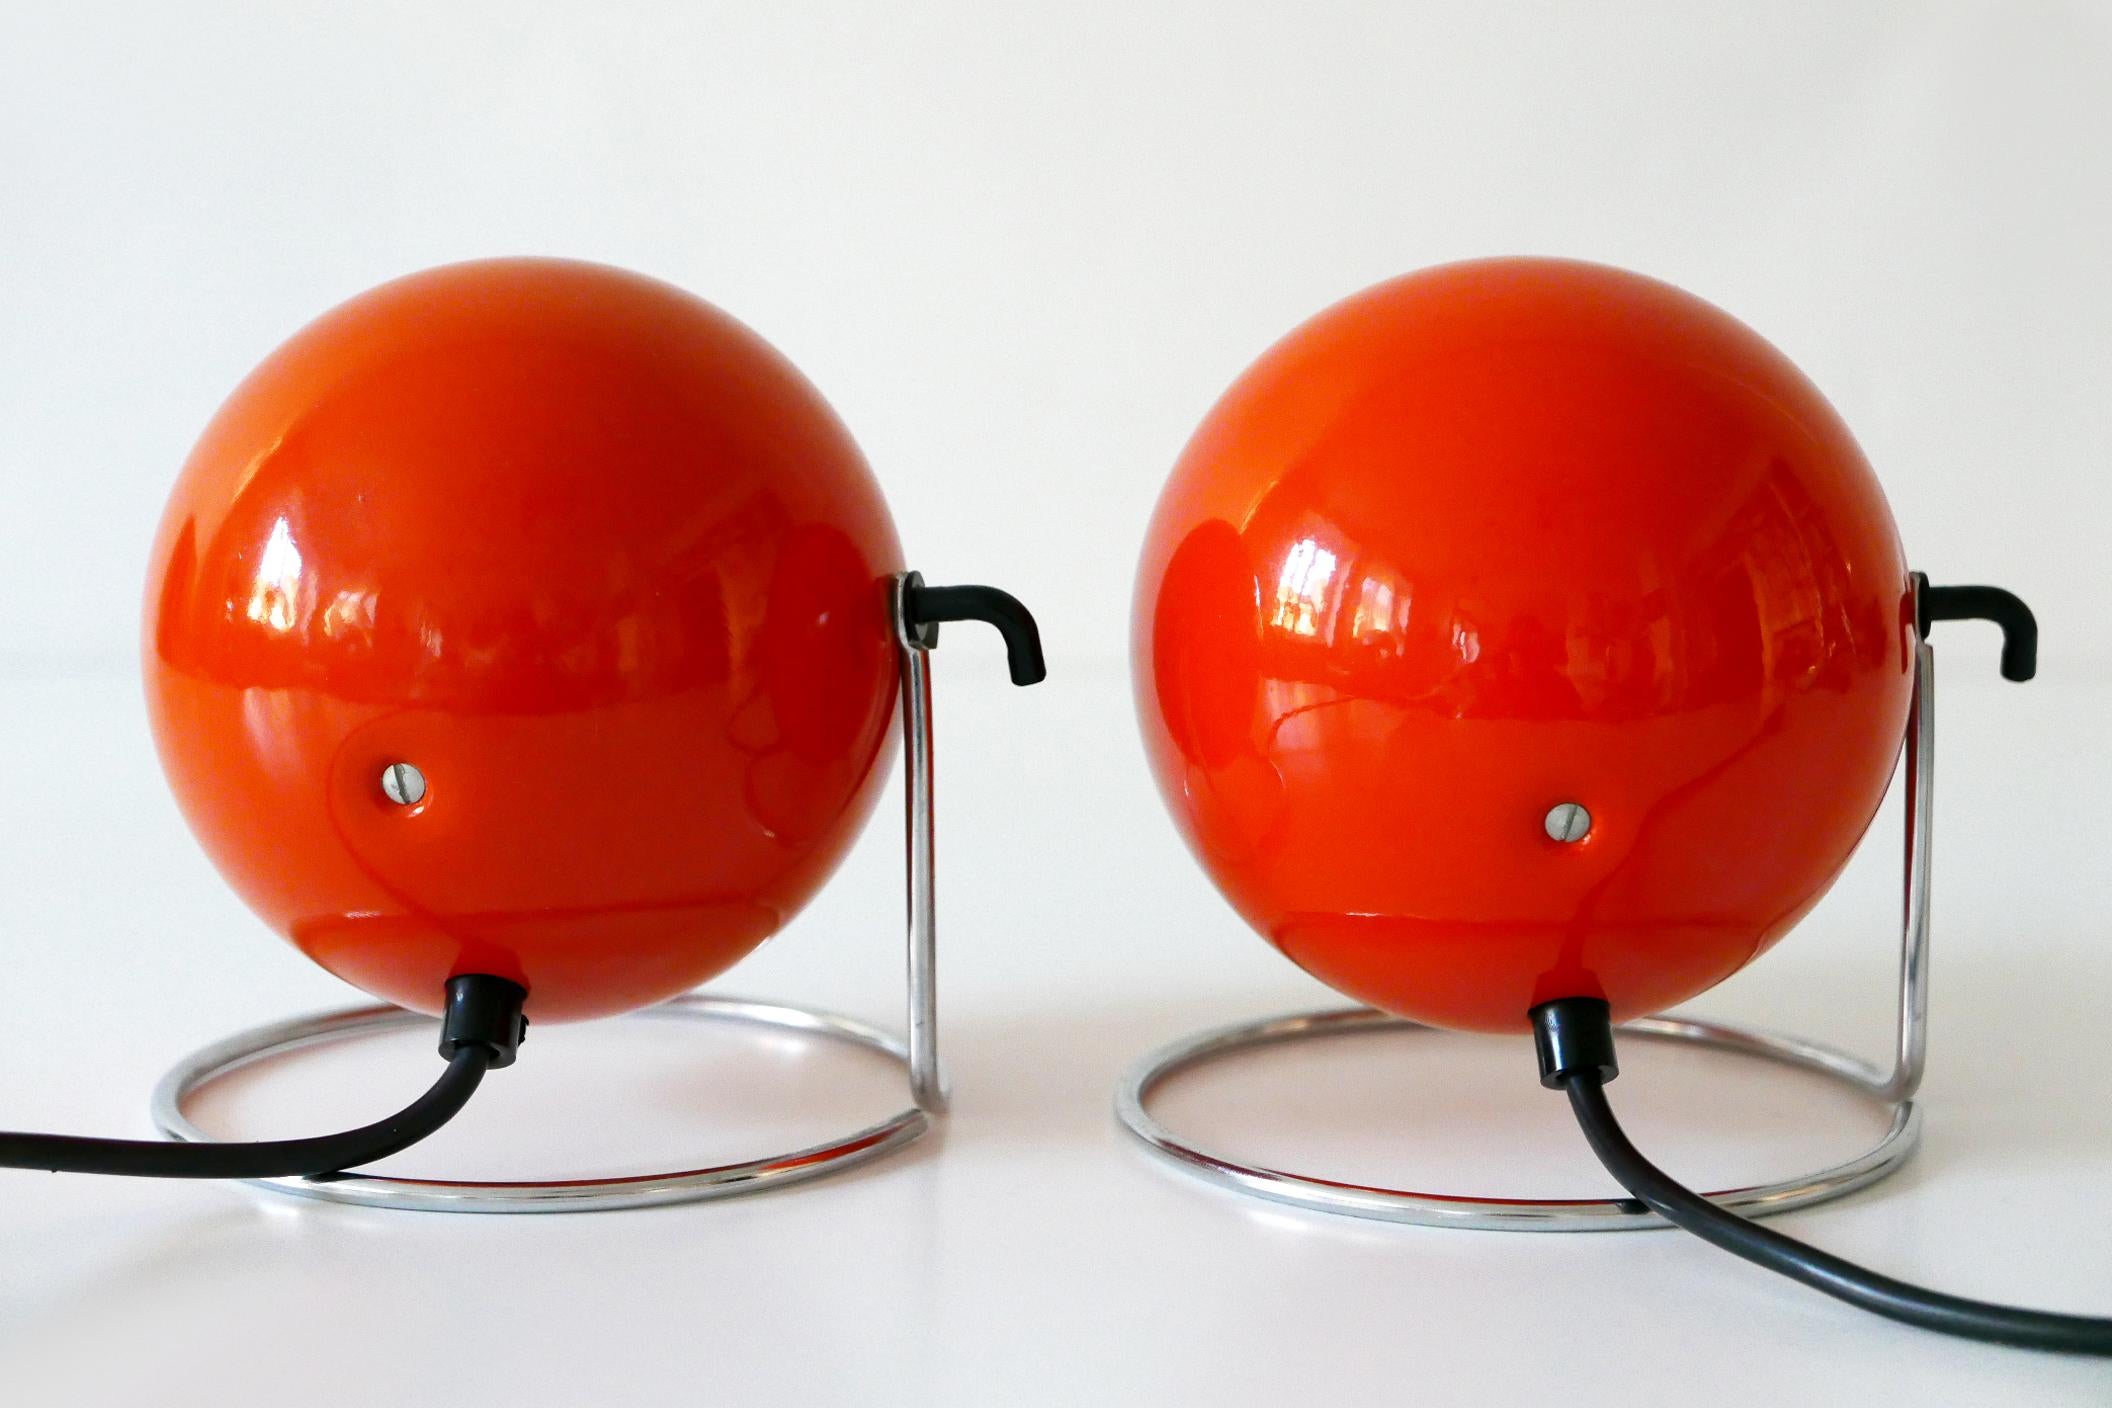 Set of Two Mid-Century Modern Metal 'Eye' Table Lamps, ERCO, 1960s-1970s Germany For Sale 6